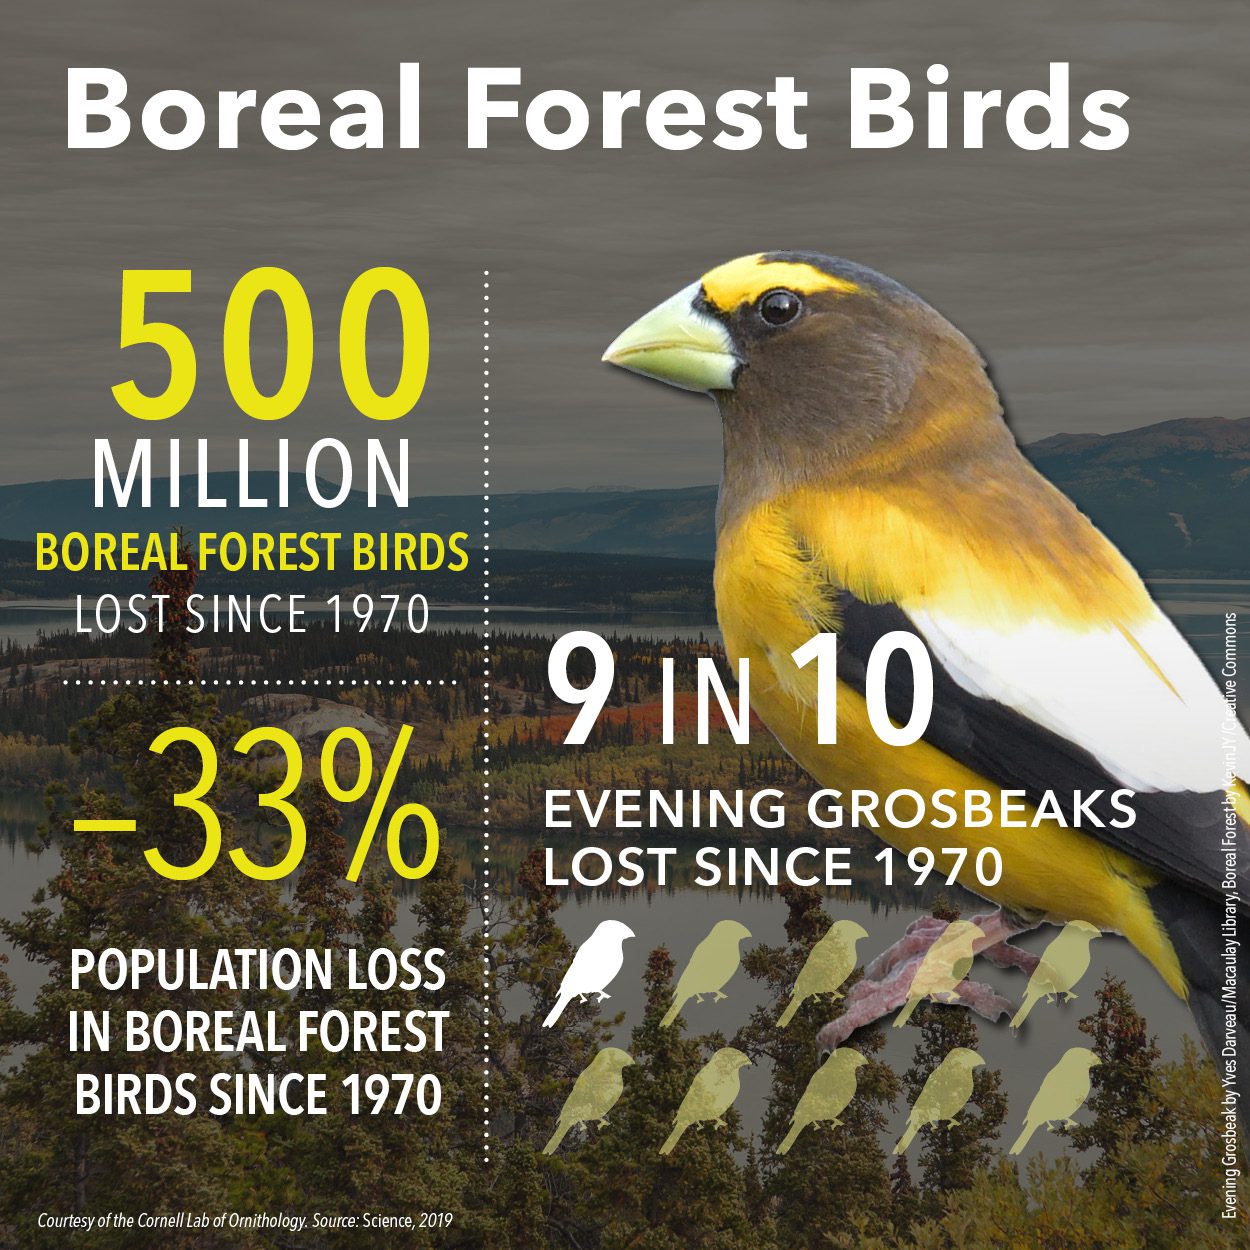 500 million boreal forest birds lost since 1970; -33% population loss. 9 in 10 Evening Grosbeaks lost since 1970.